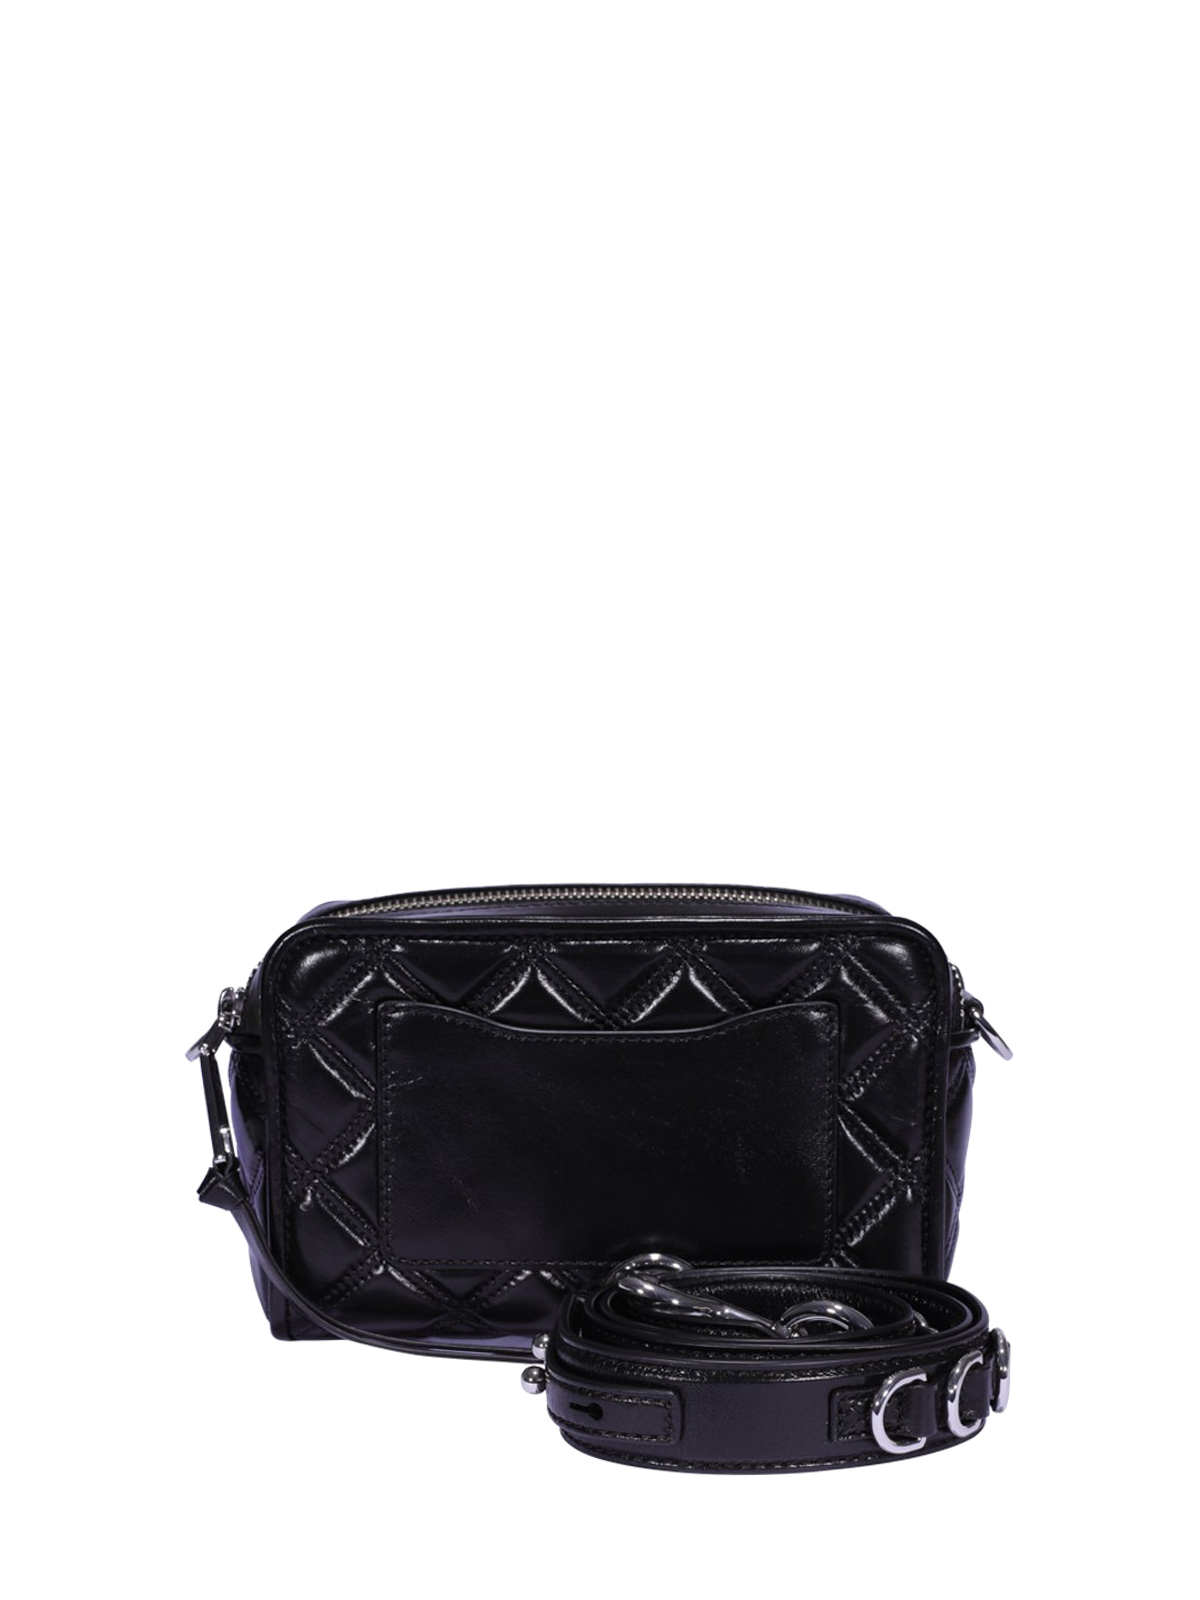 The Marc Jacobs Softshot 21 Quilted Black Crossbody